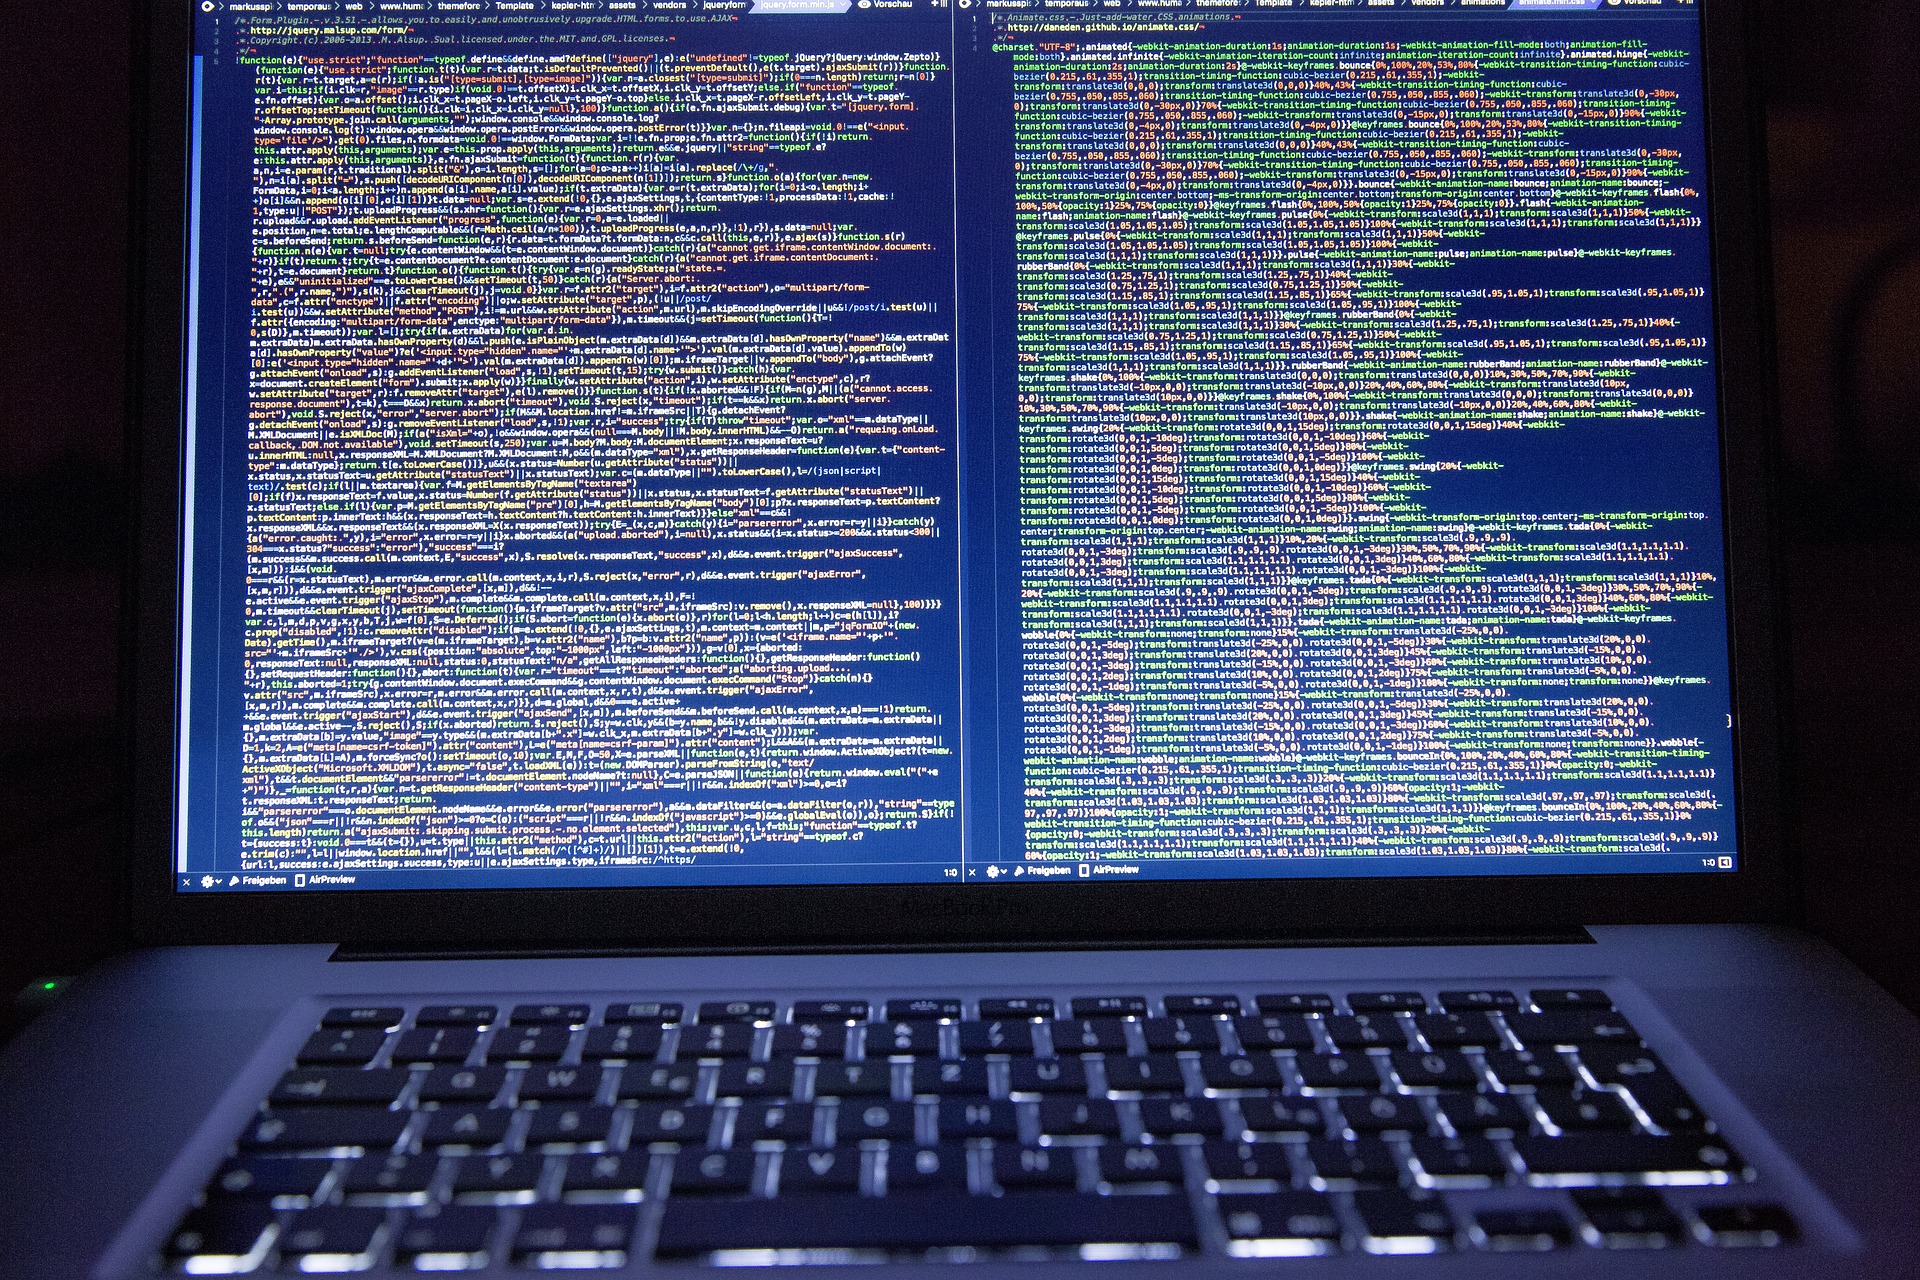 A photograph of a laptop screen displaying full pages of code.